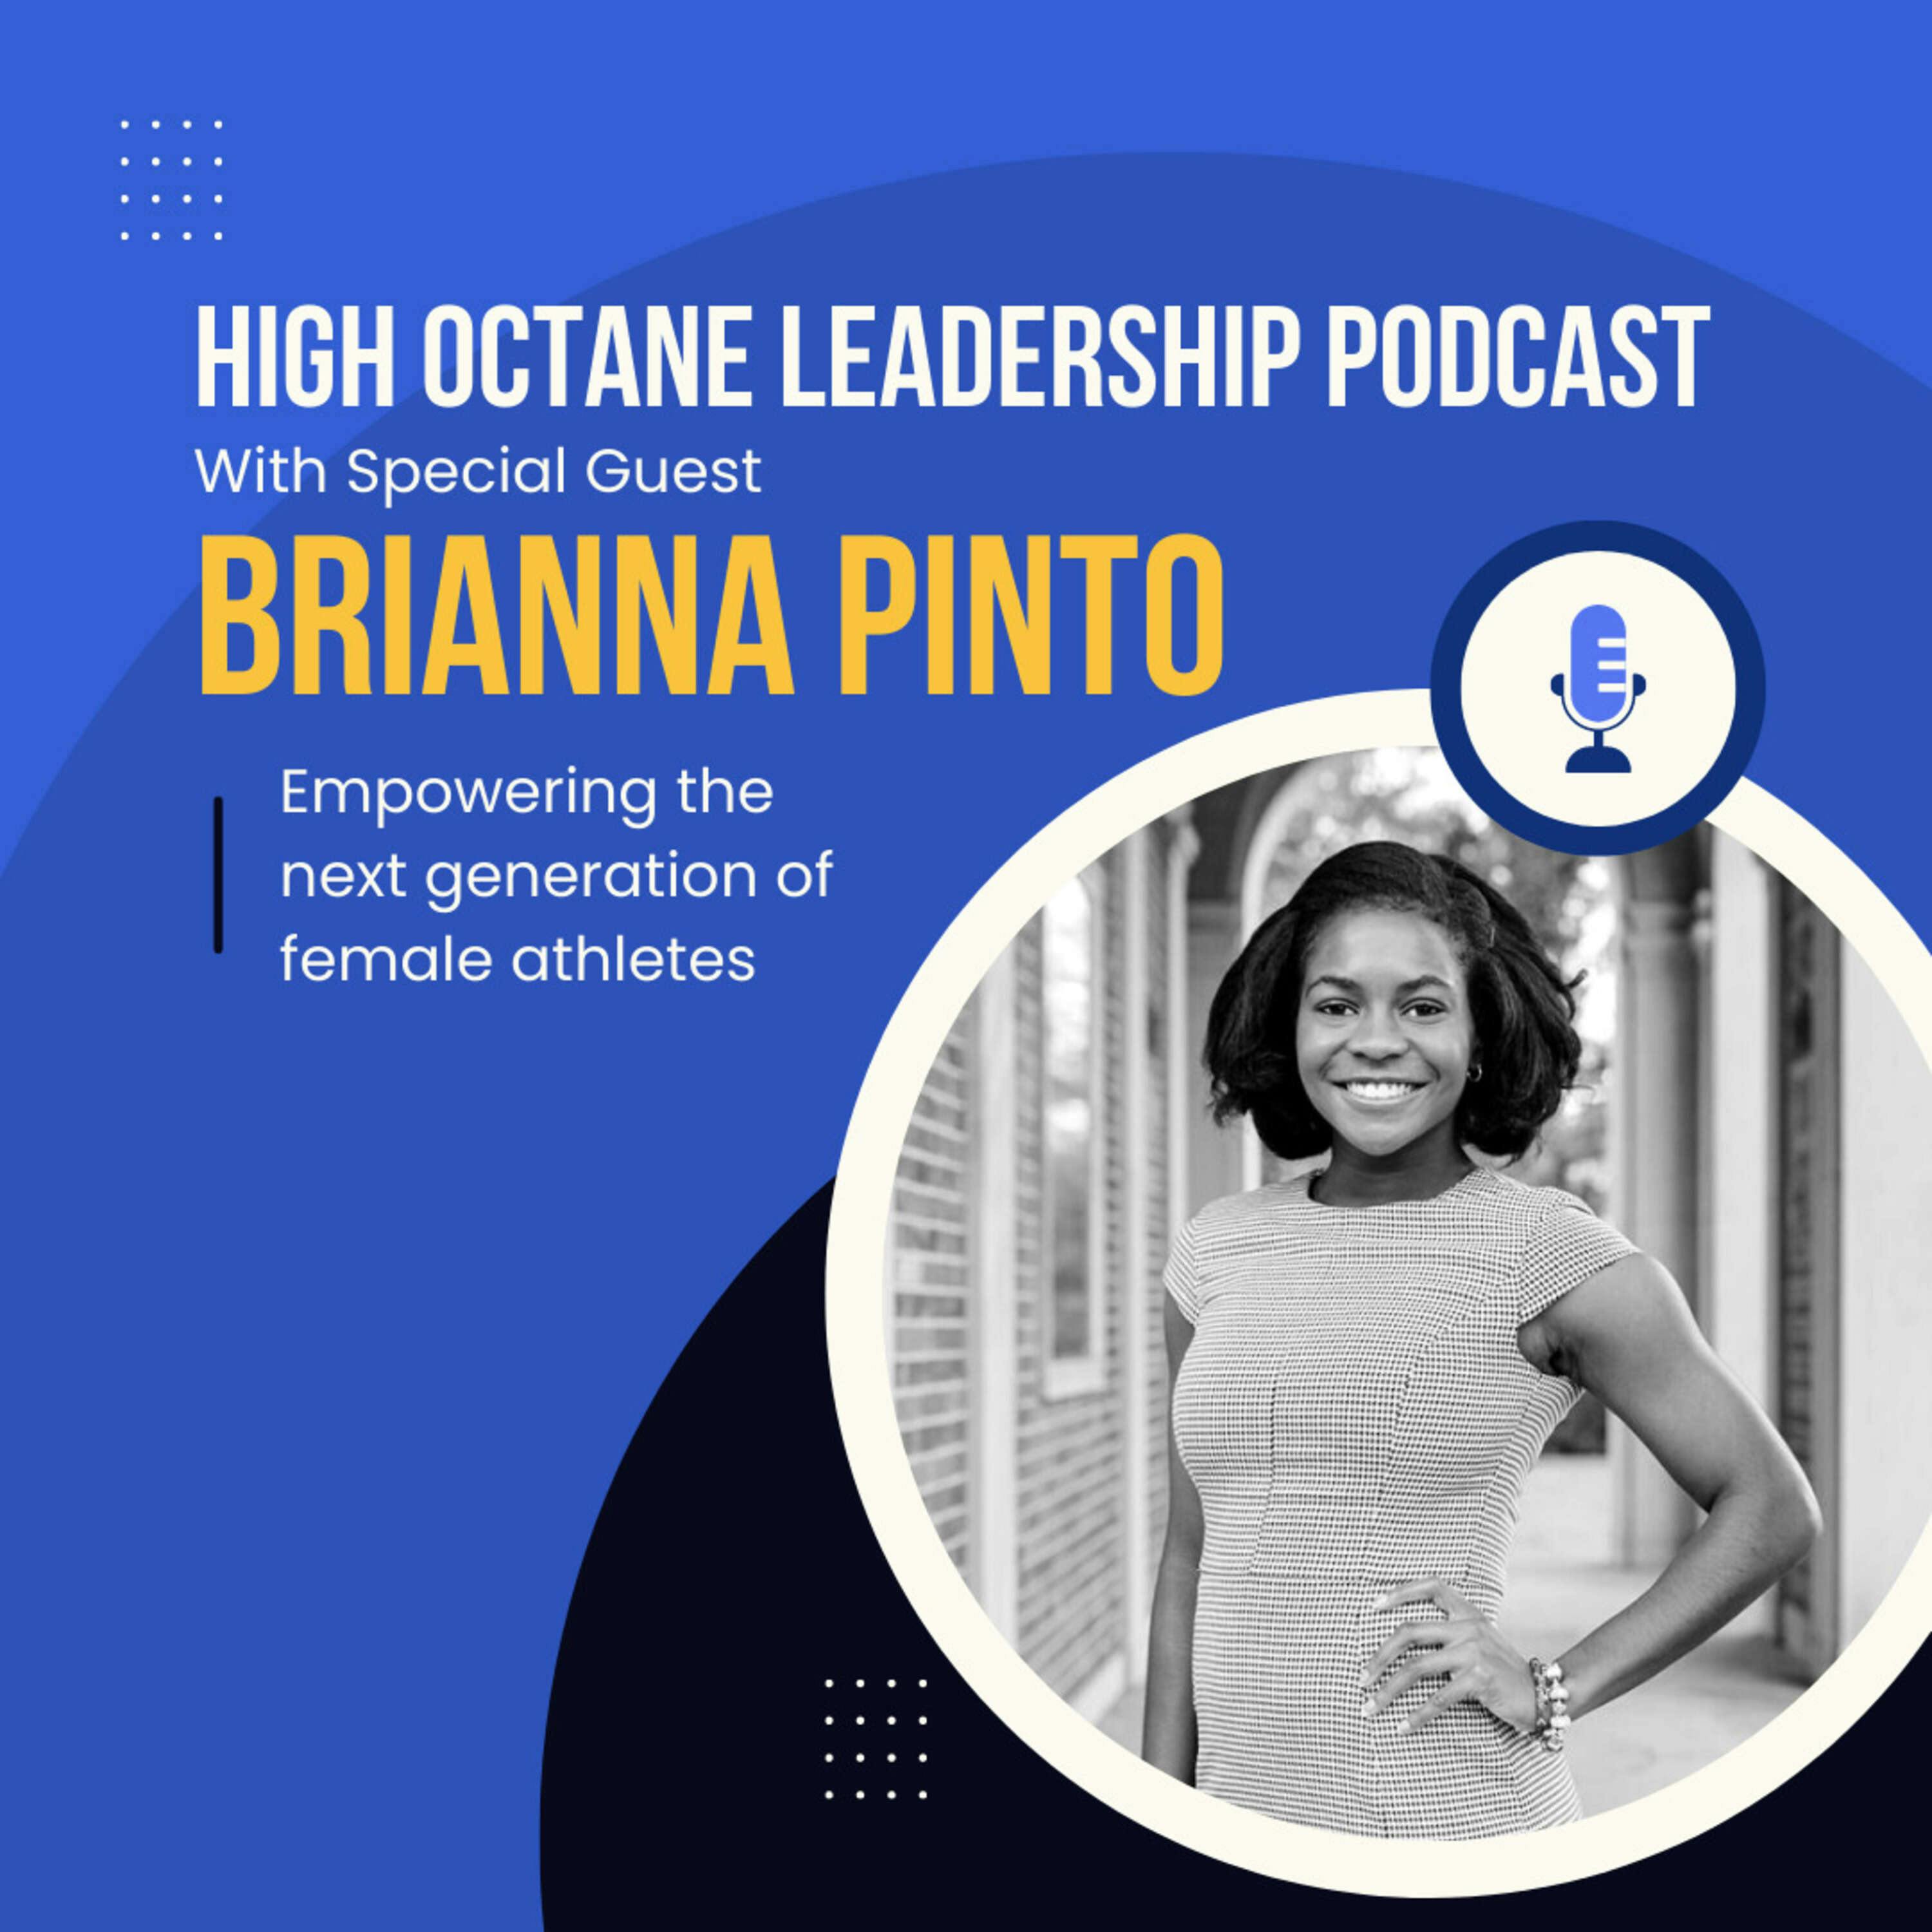 NC Courage’s Brianna Pinto: Empowering the next generation of female athletes